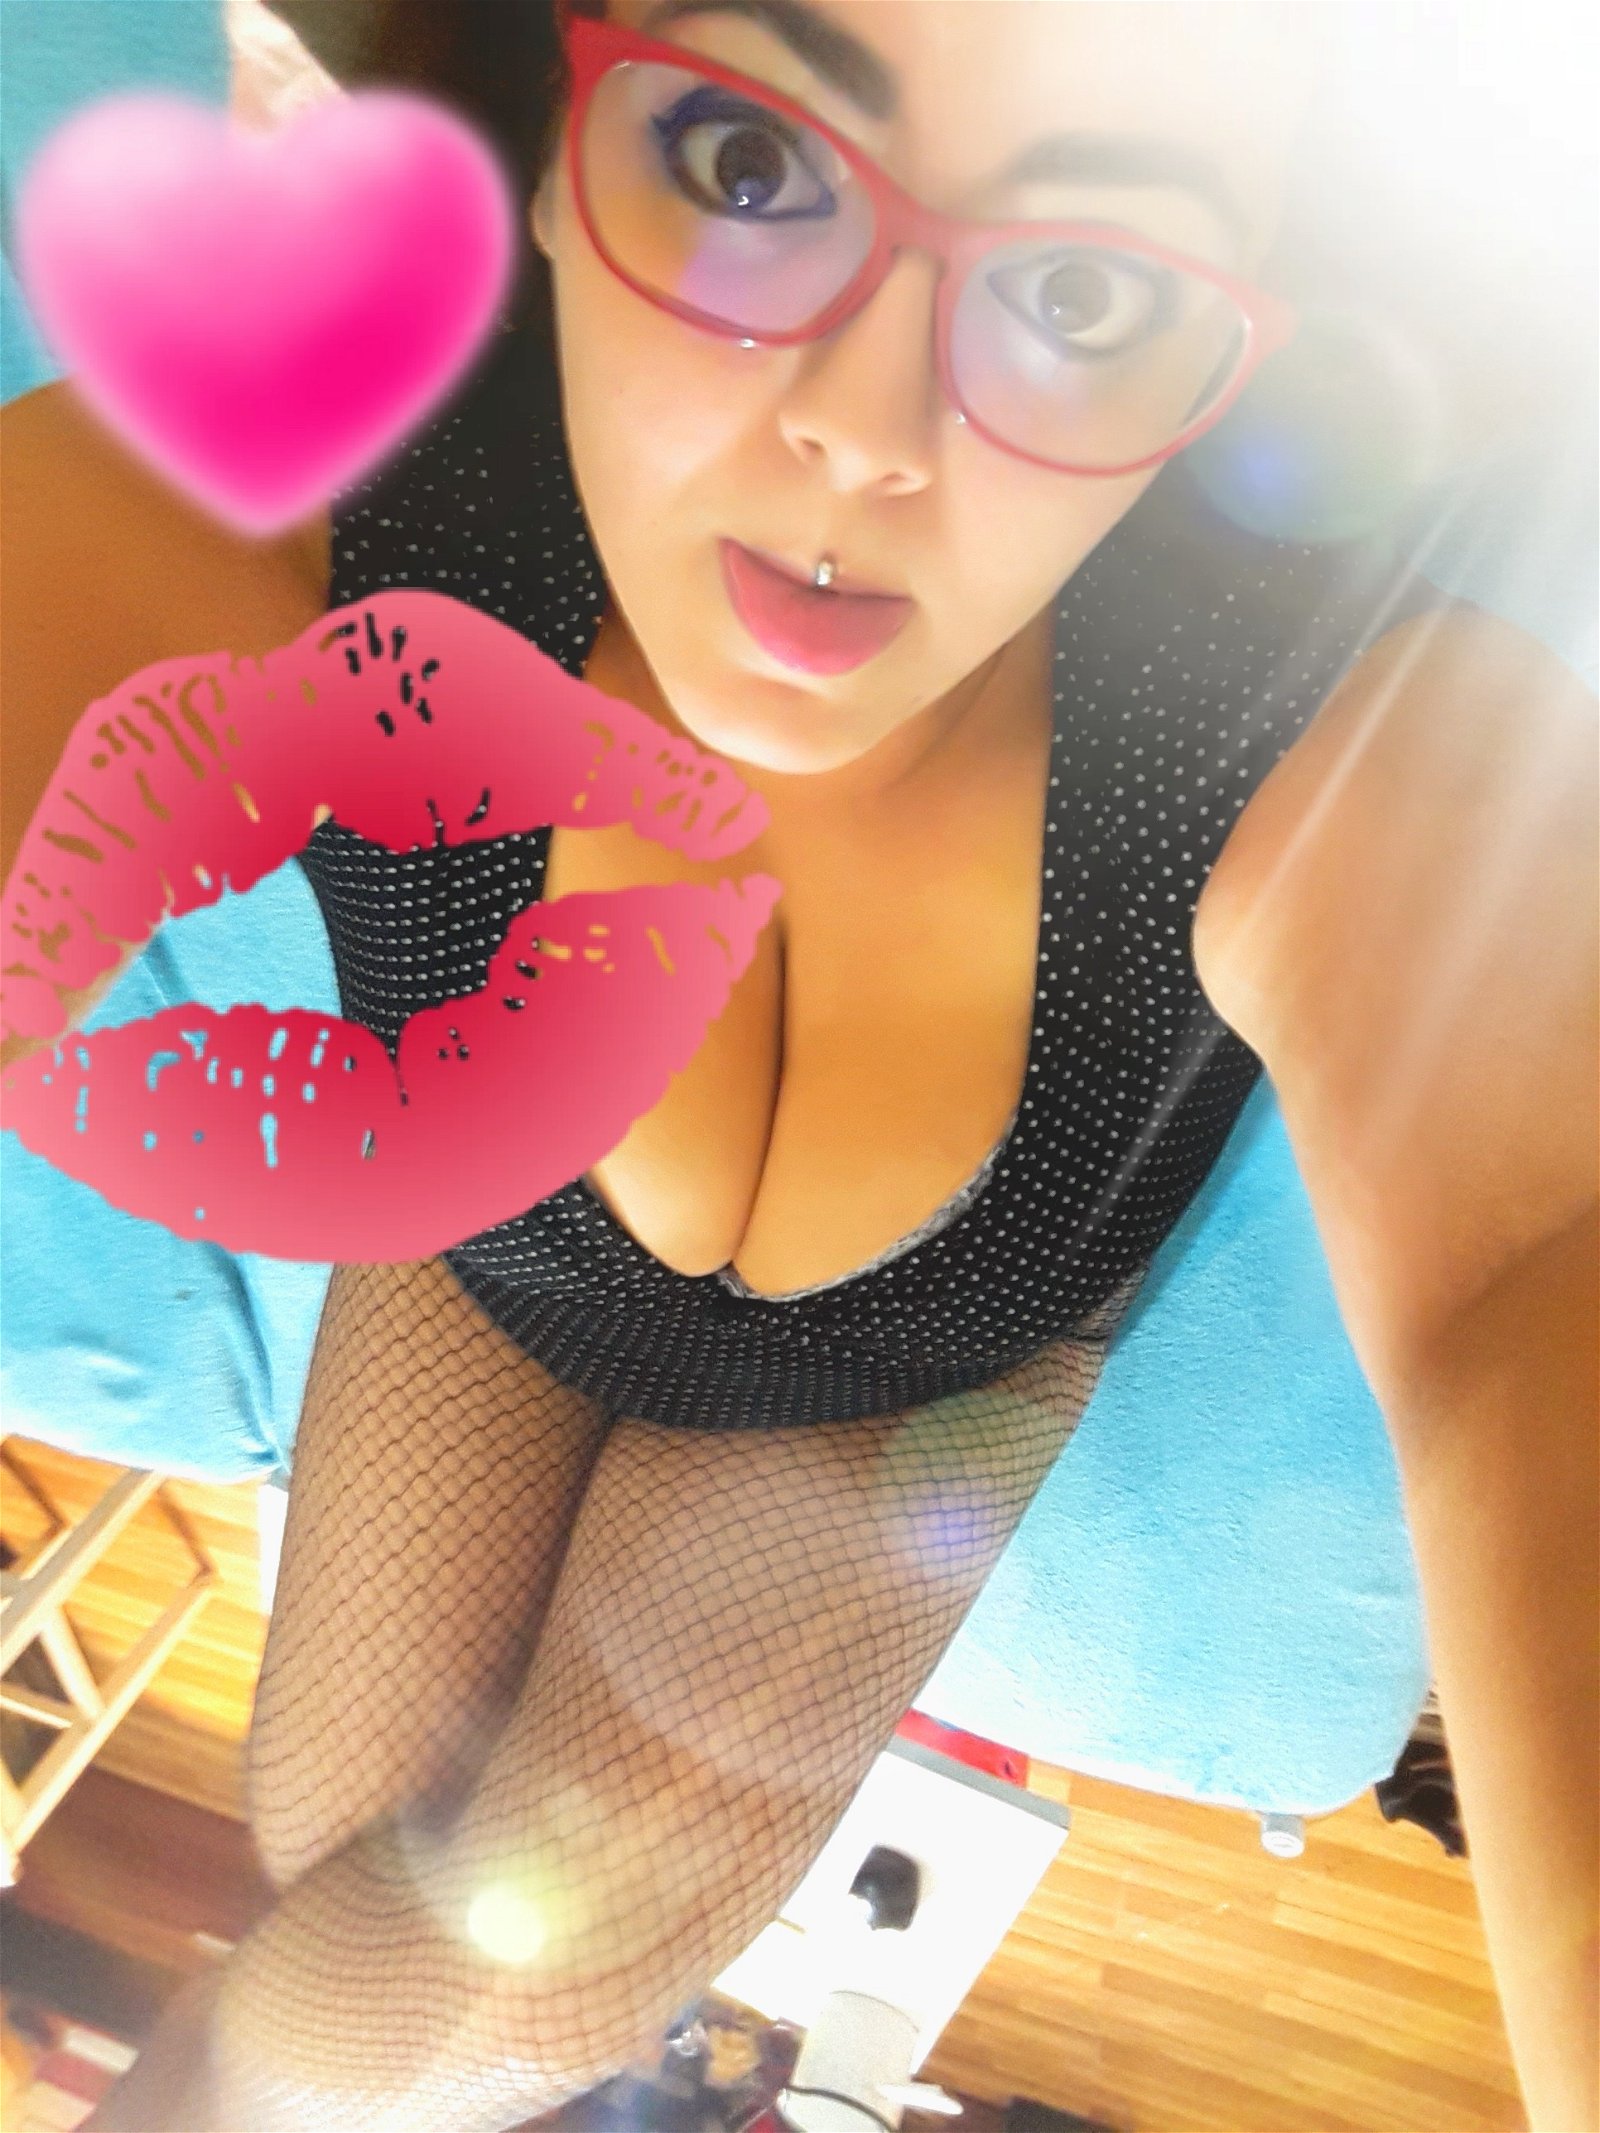 Photo by BustyVonKat with the username @BustyVonKat, who is a star user, posted on February 7, 2019 and the text says 'Come join me on mfc.

https://t.co/7OeHbUd2Jl

Let's have some fuuuun 😜💋

#cammodel #bbw #myfreecams'